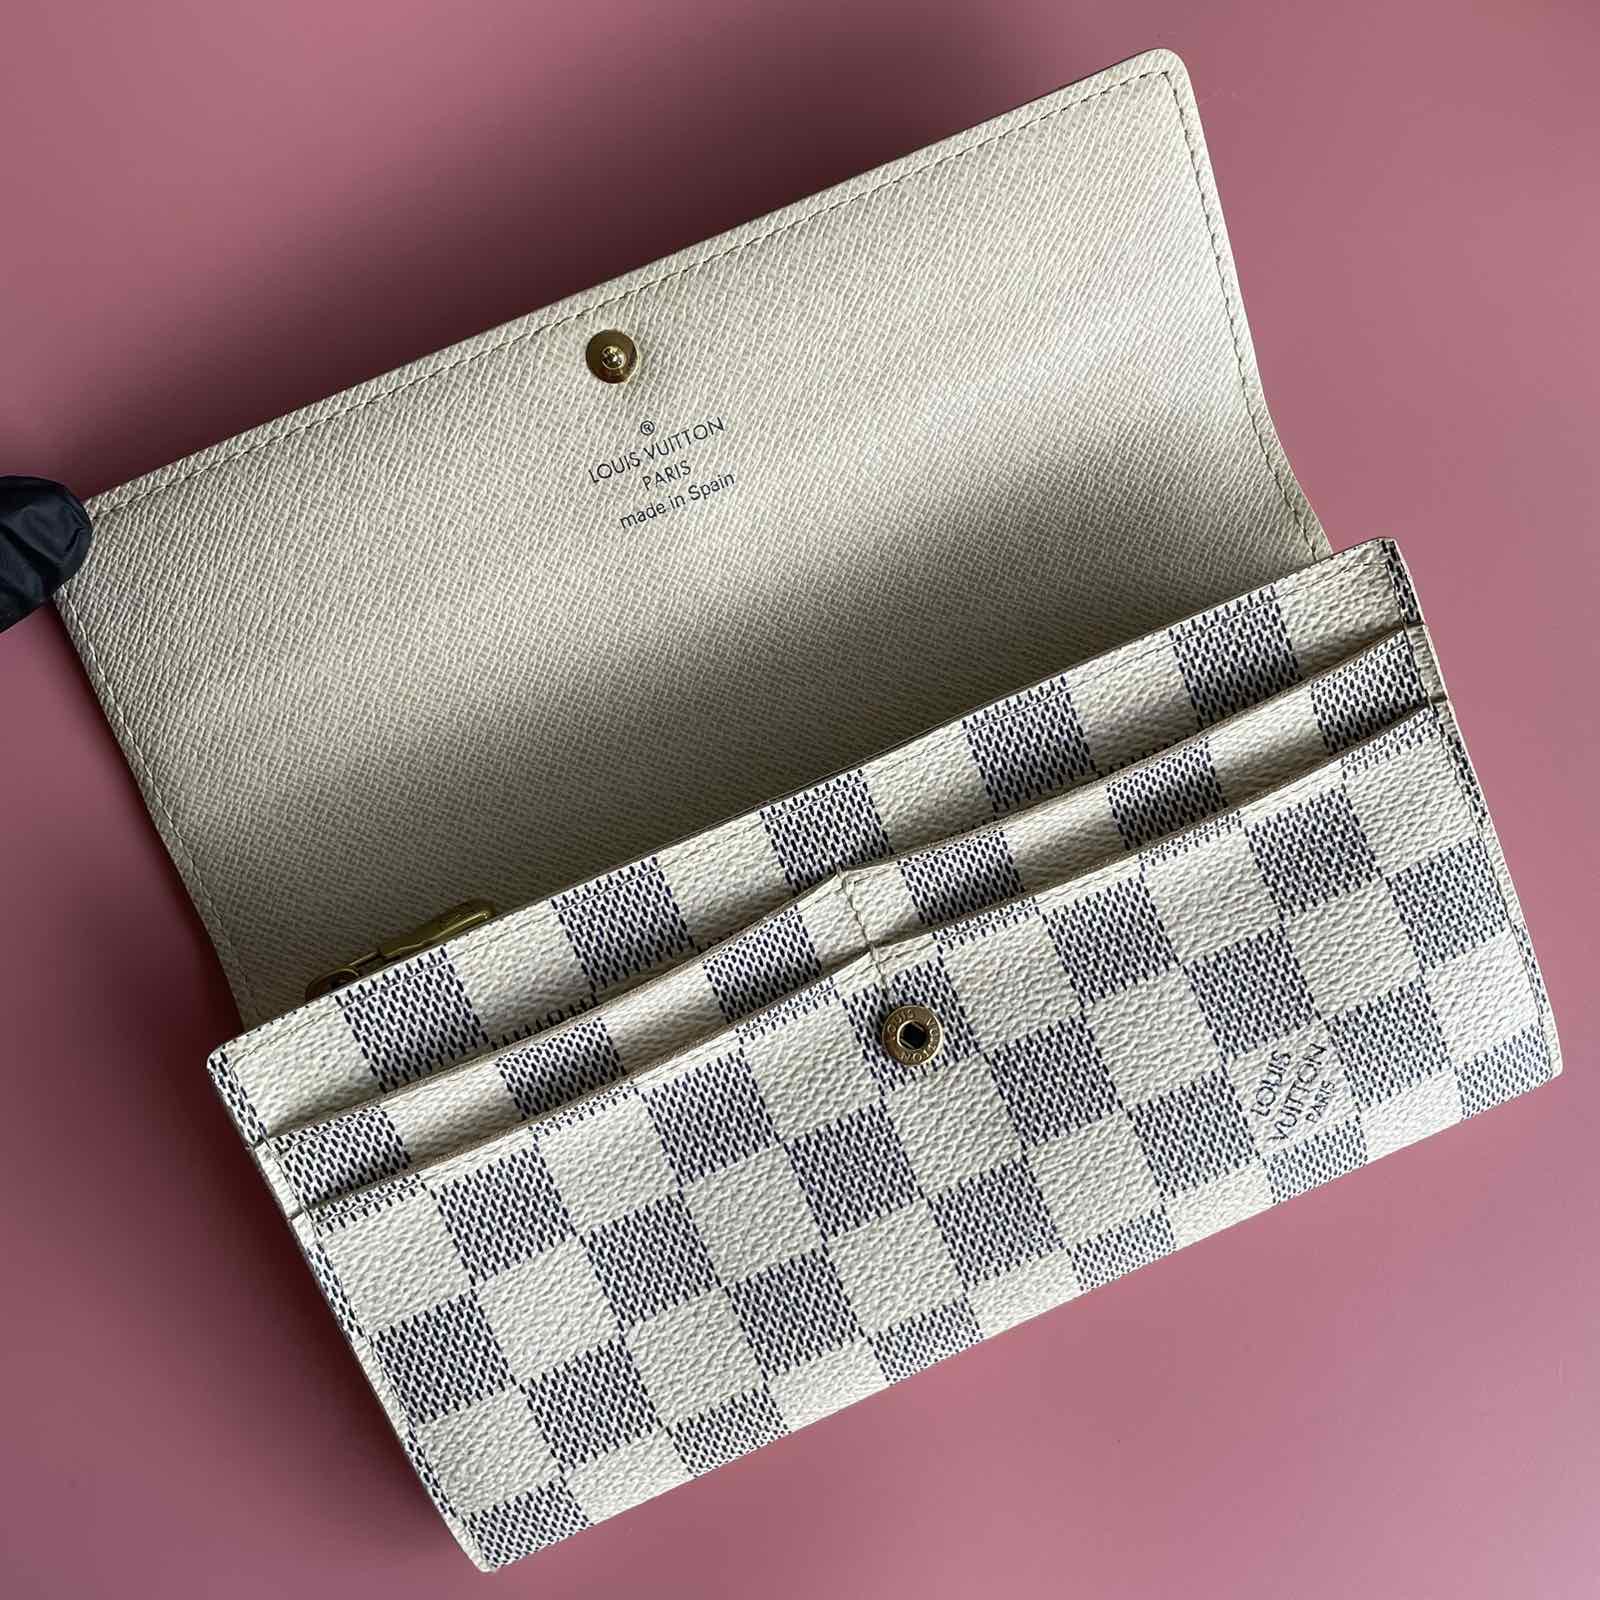 New Sarah wallet Damier Azur Studs💗 + key pouch mono; question in